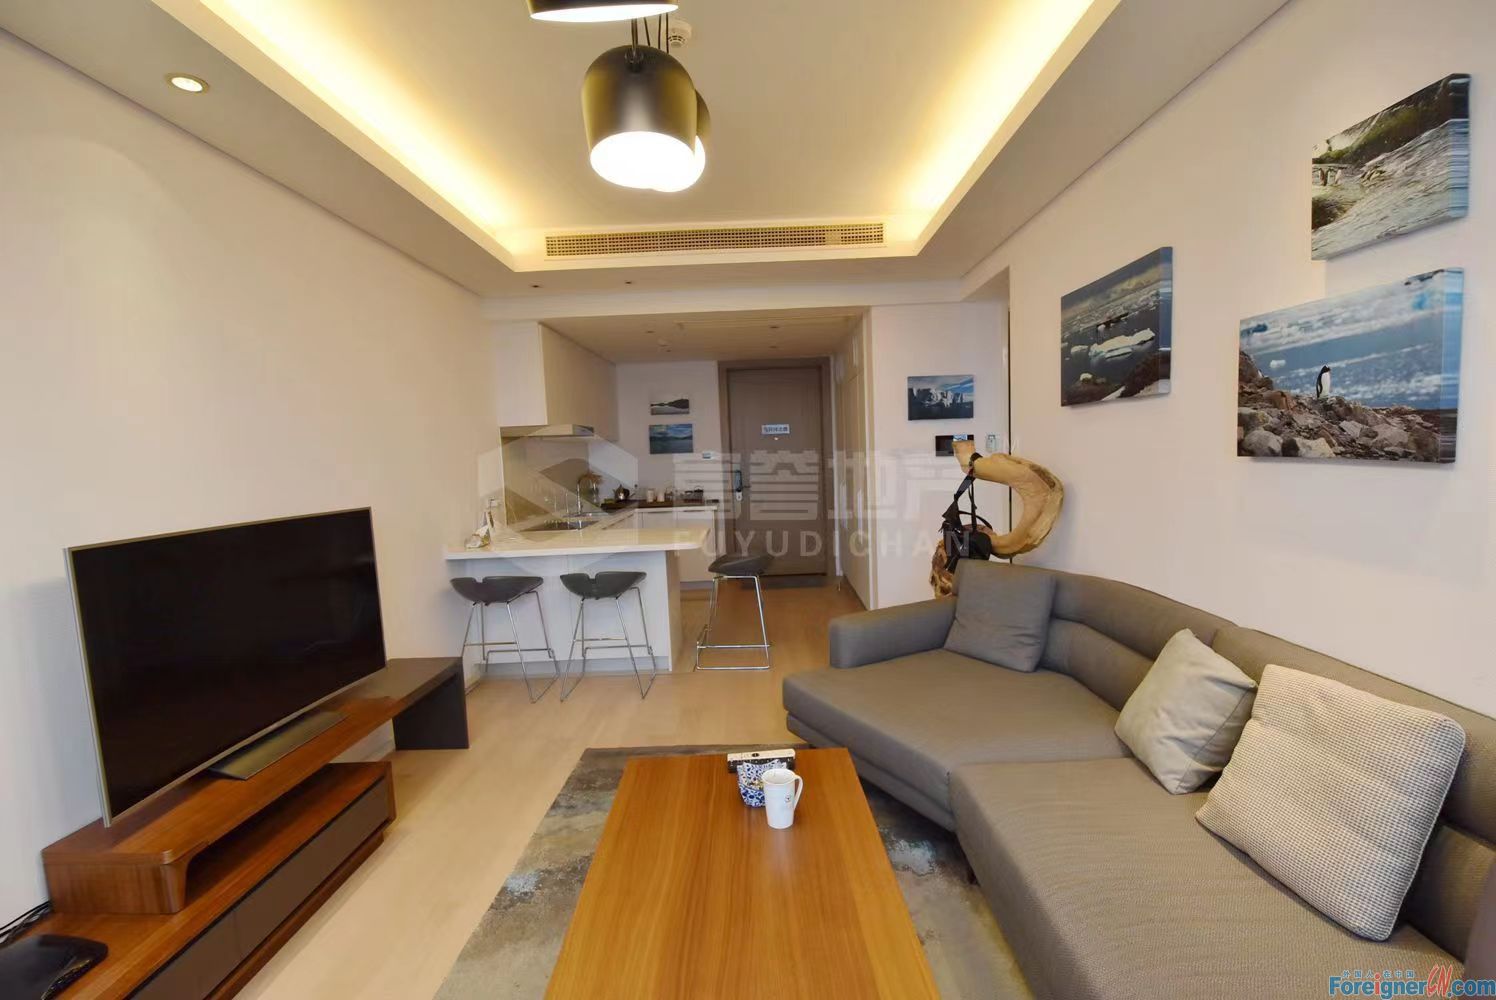 Luxurious！！！Apartment rent in Suzhou /1 study room and 1 bathroom/ modern and cozy livinng room/Xinghai square/Suzhou Center Shopping Center